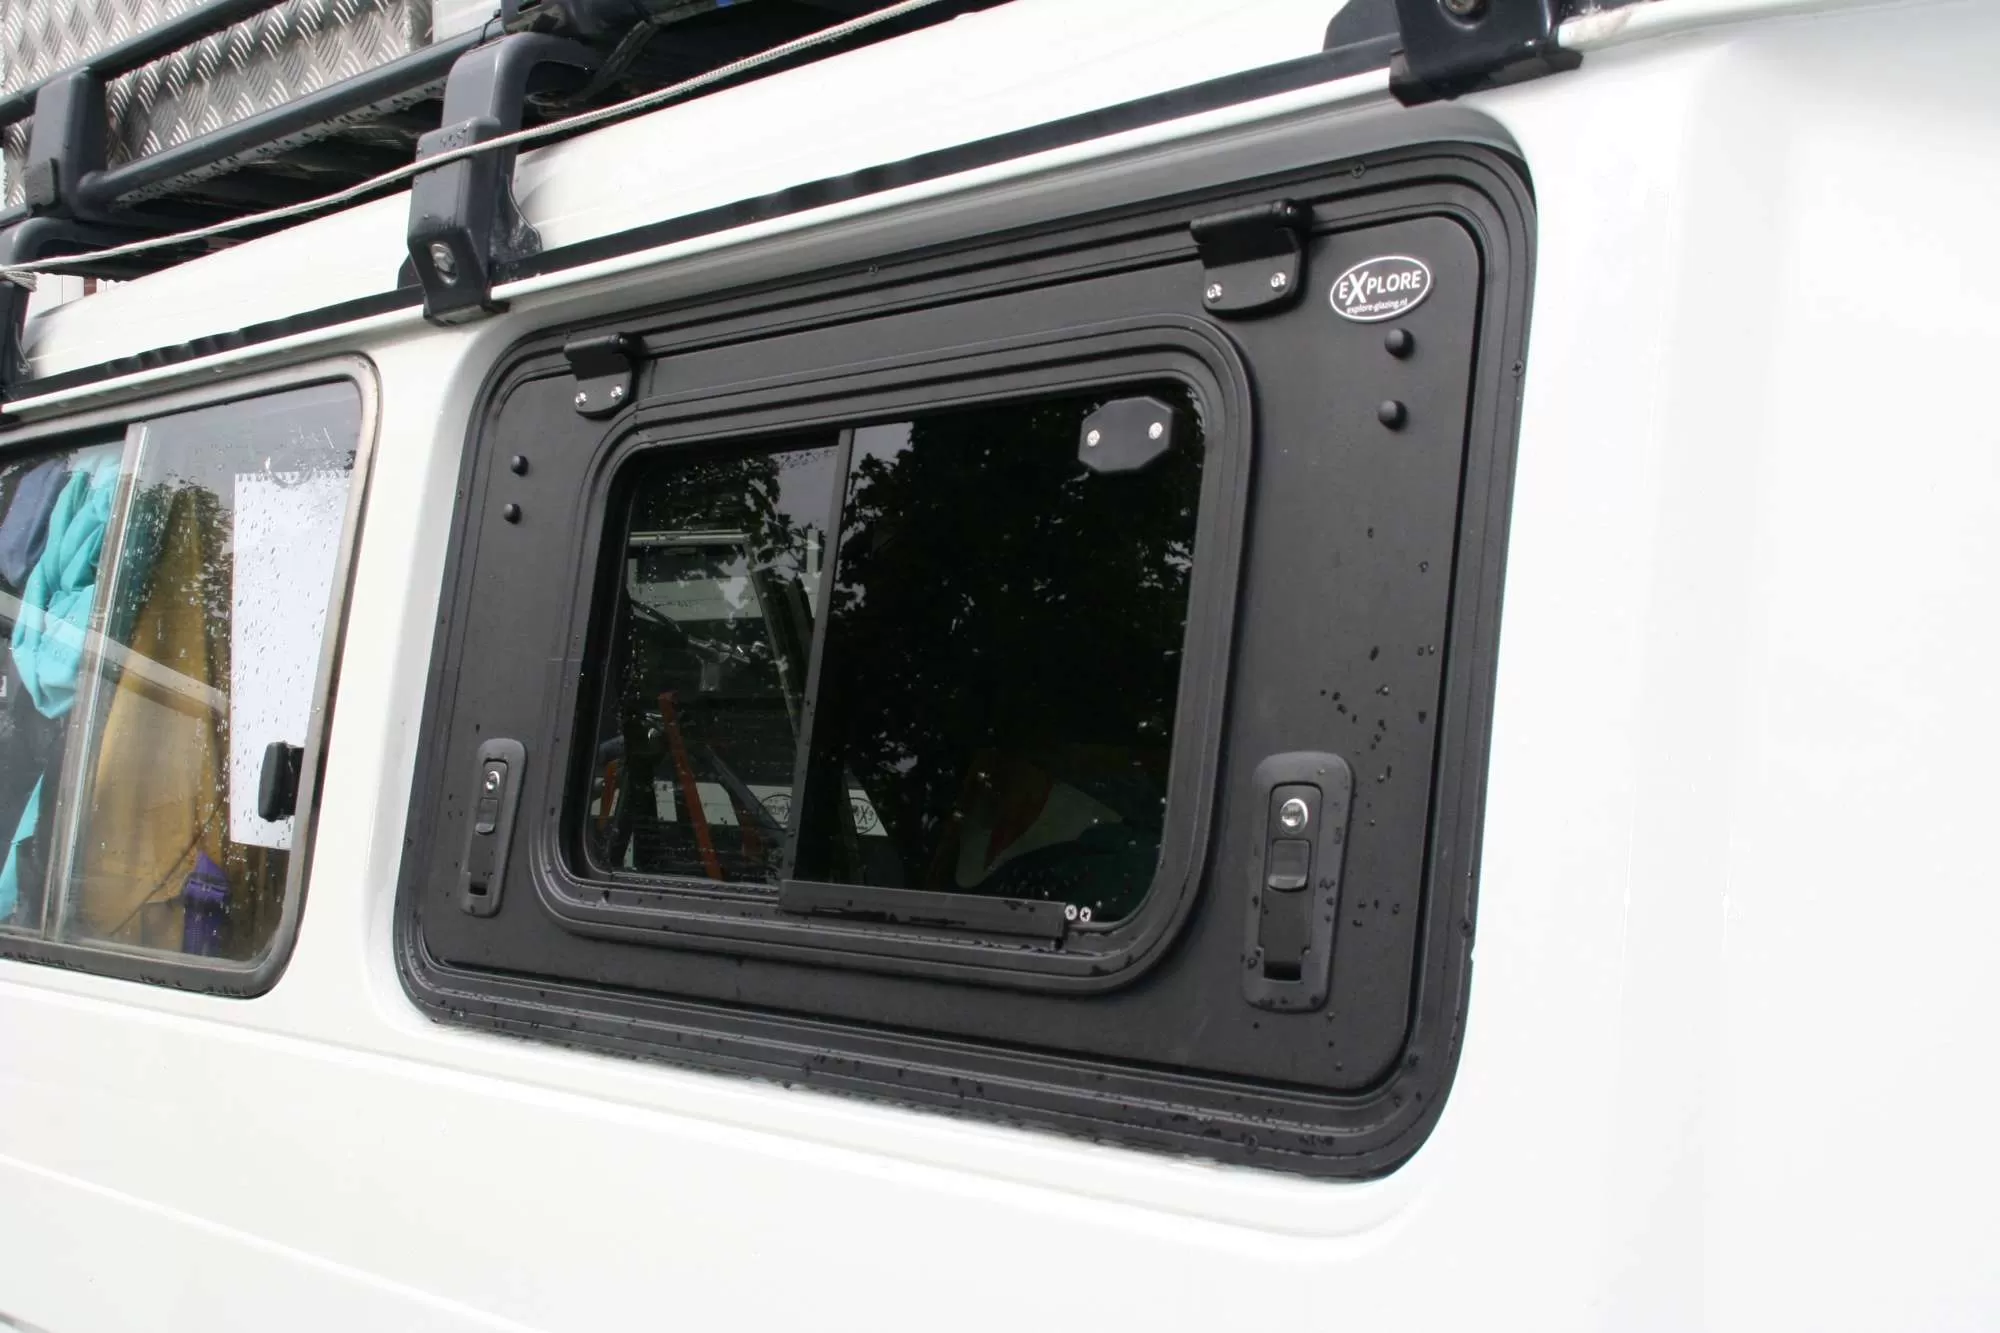 Toyota Troop Carrier with Explore Glazing gullwing window installed, showcasing functionality and design.